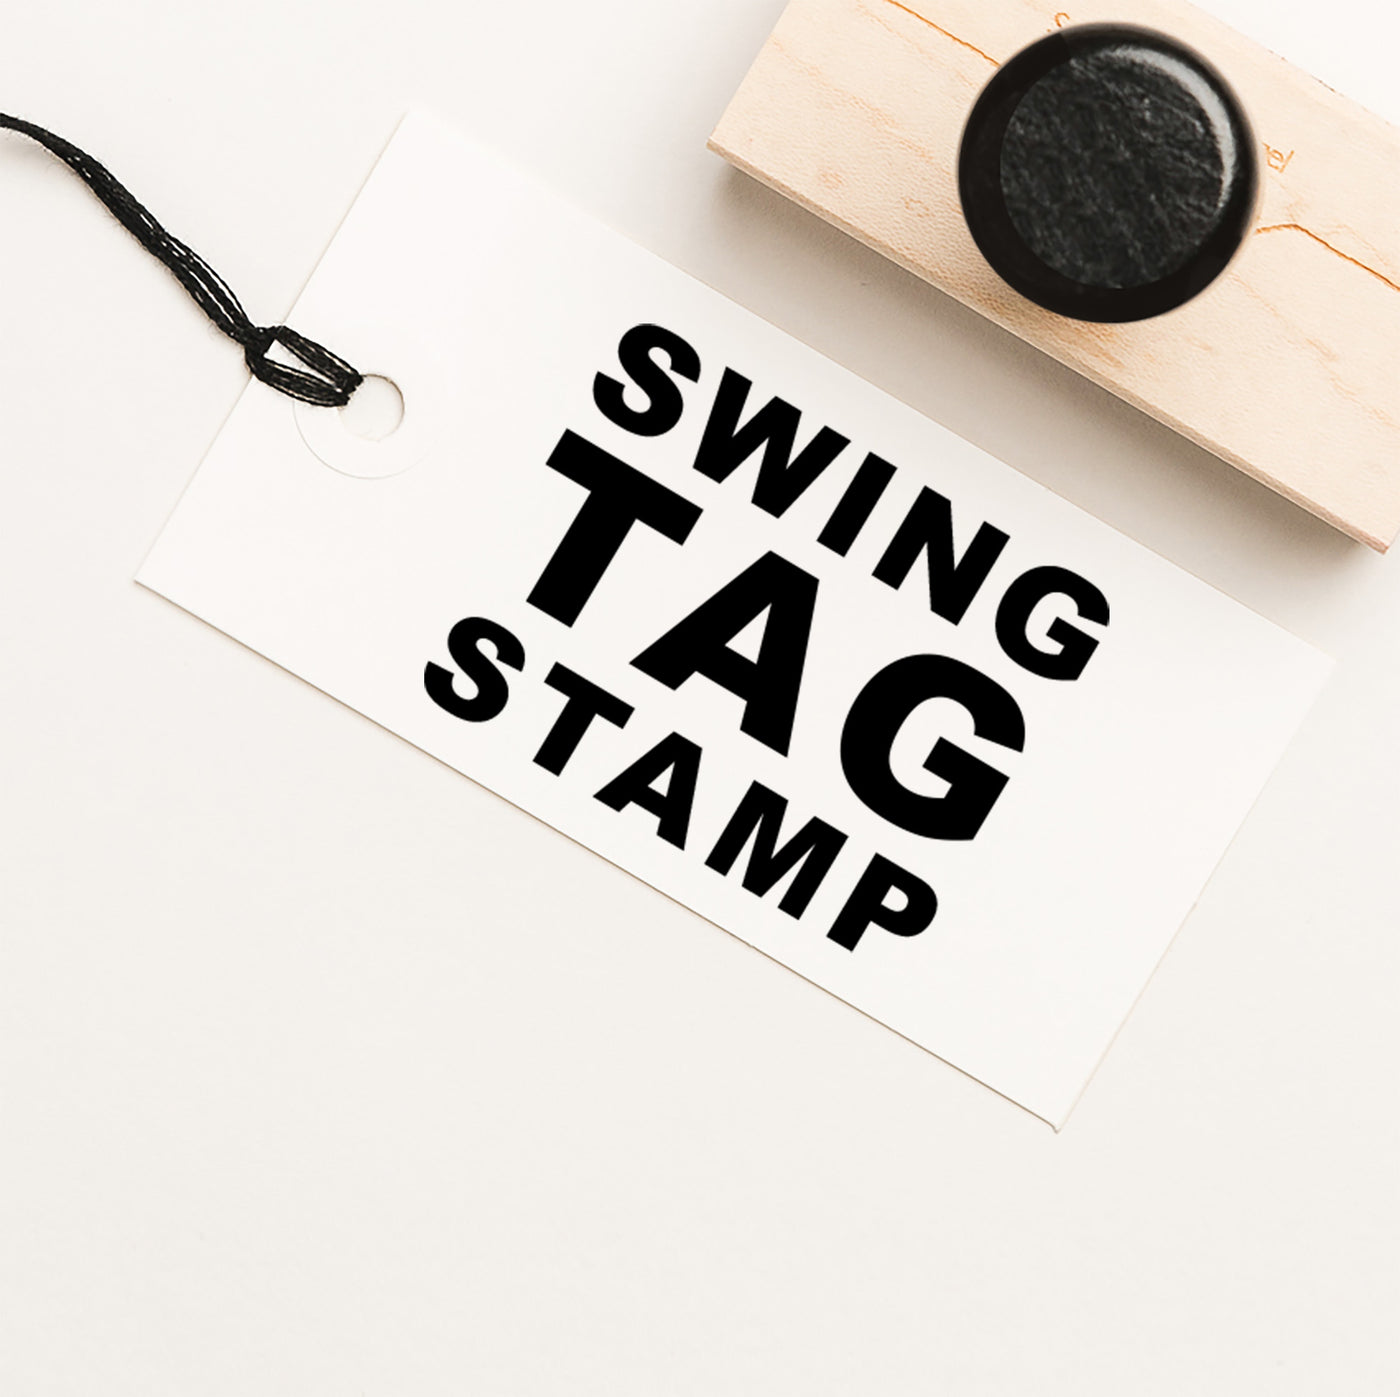 Logo Stamp for Swing Tags | Swing Tag Branding with Rubber Stamp | Heirloom Seals